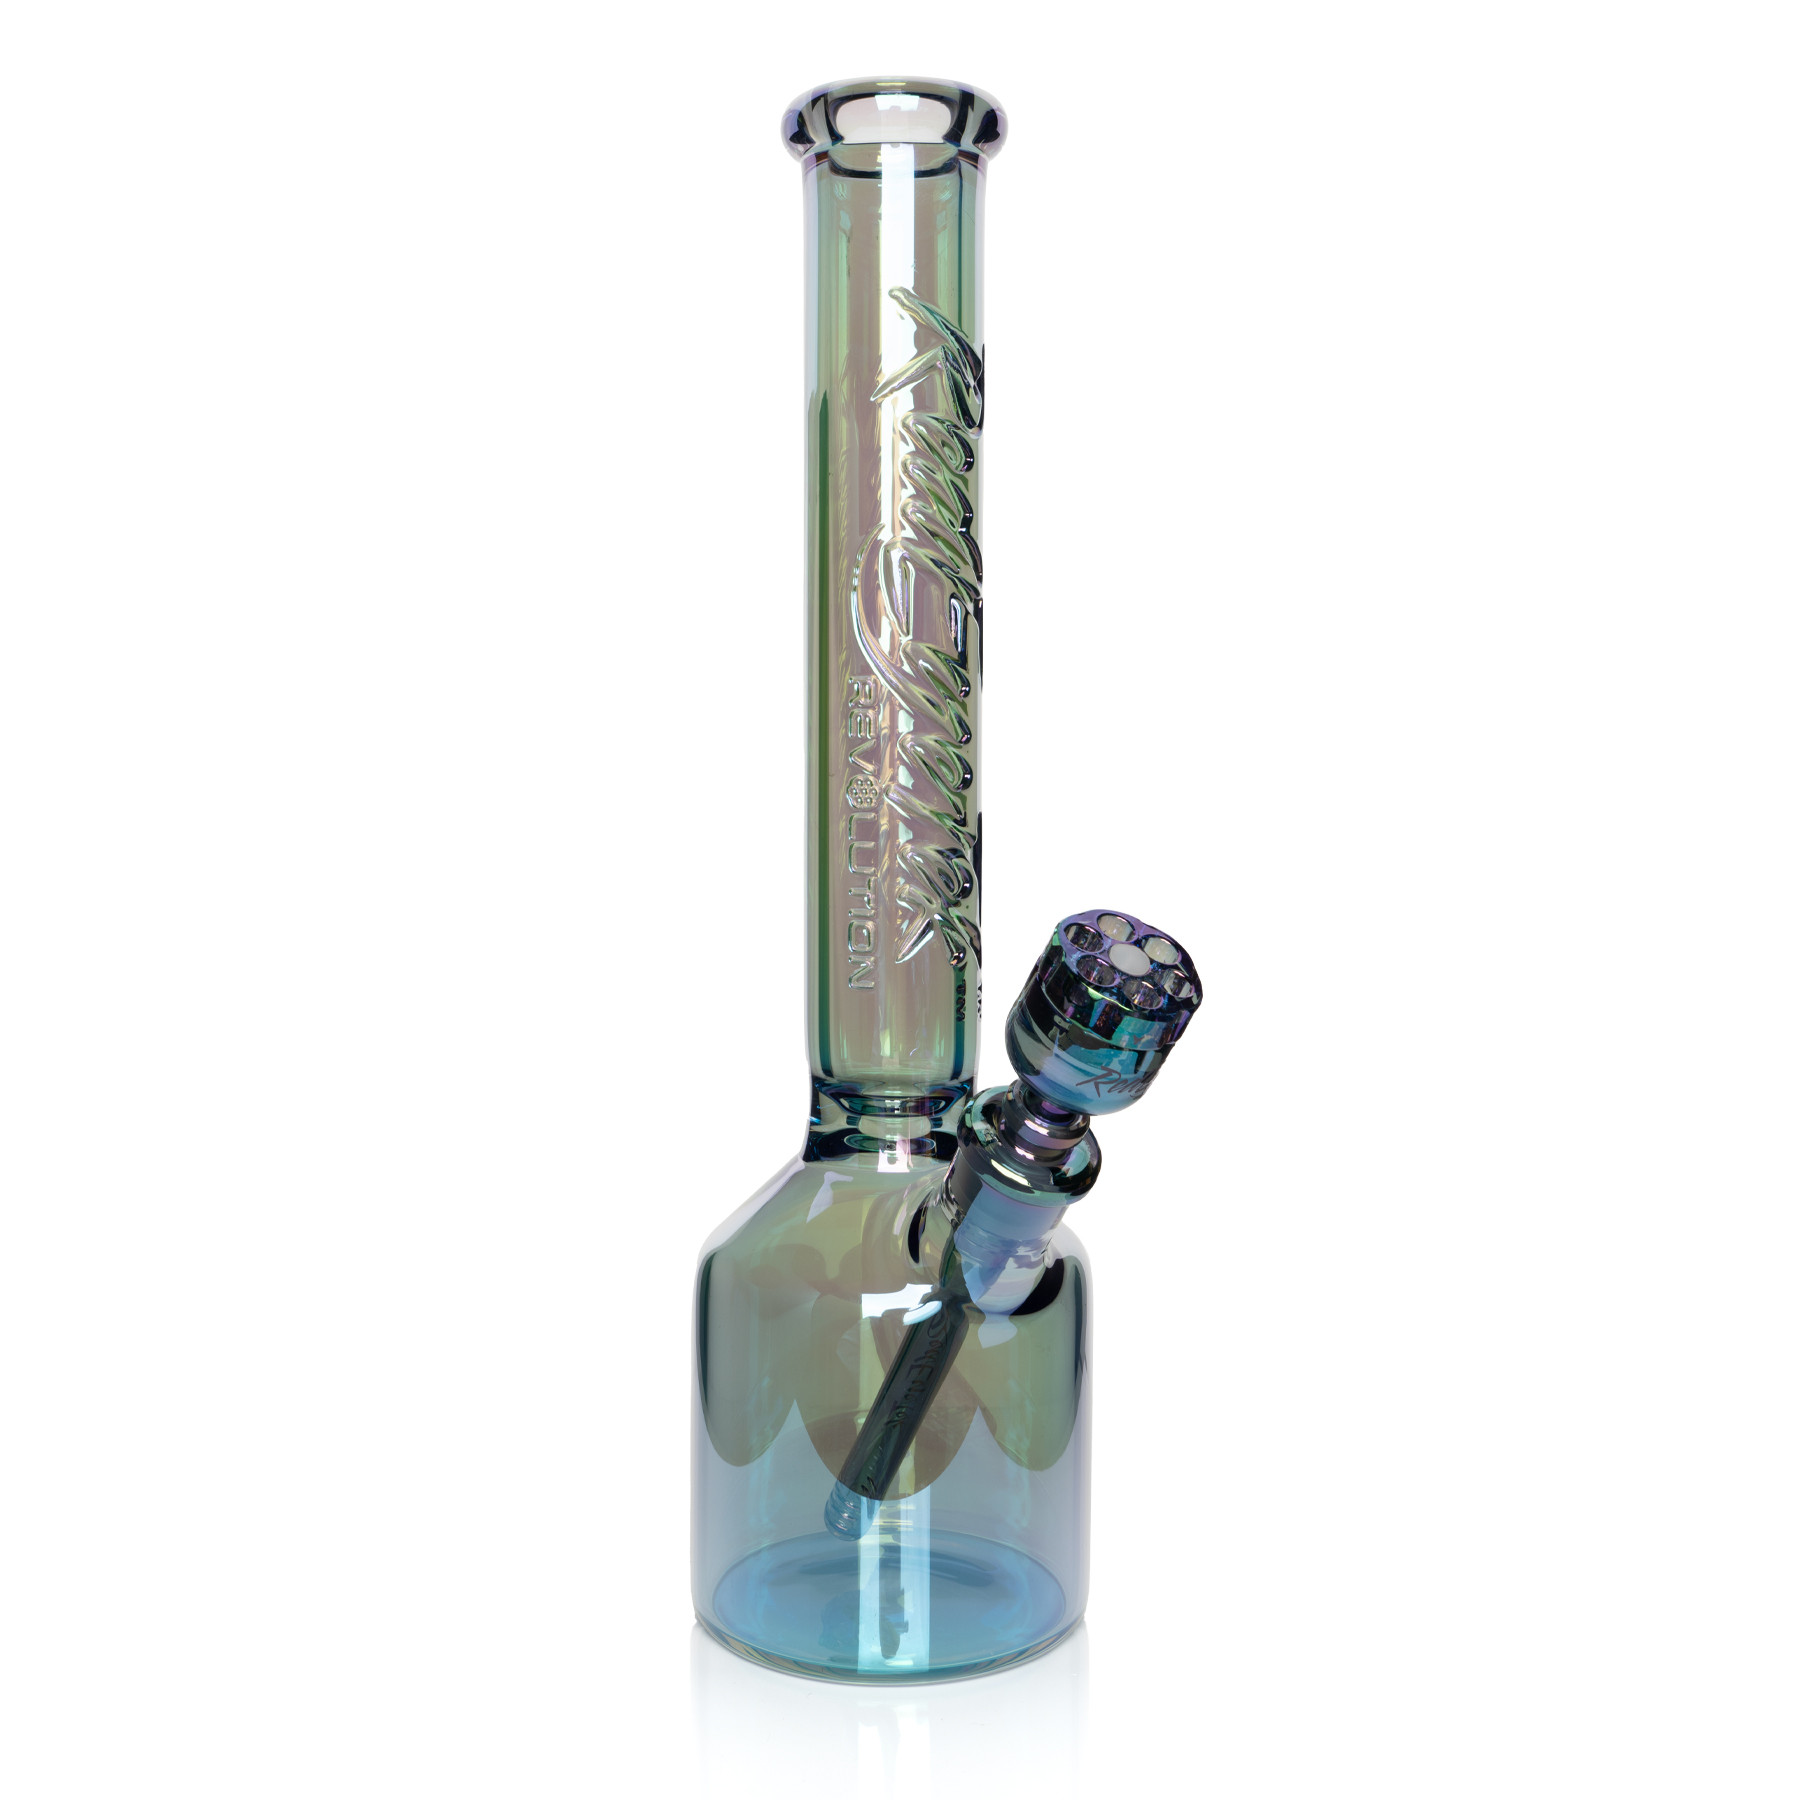 17" 7mm Thick Metallic Terminator Finish Revolution Canteen Base Water Pipe